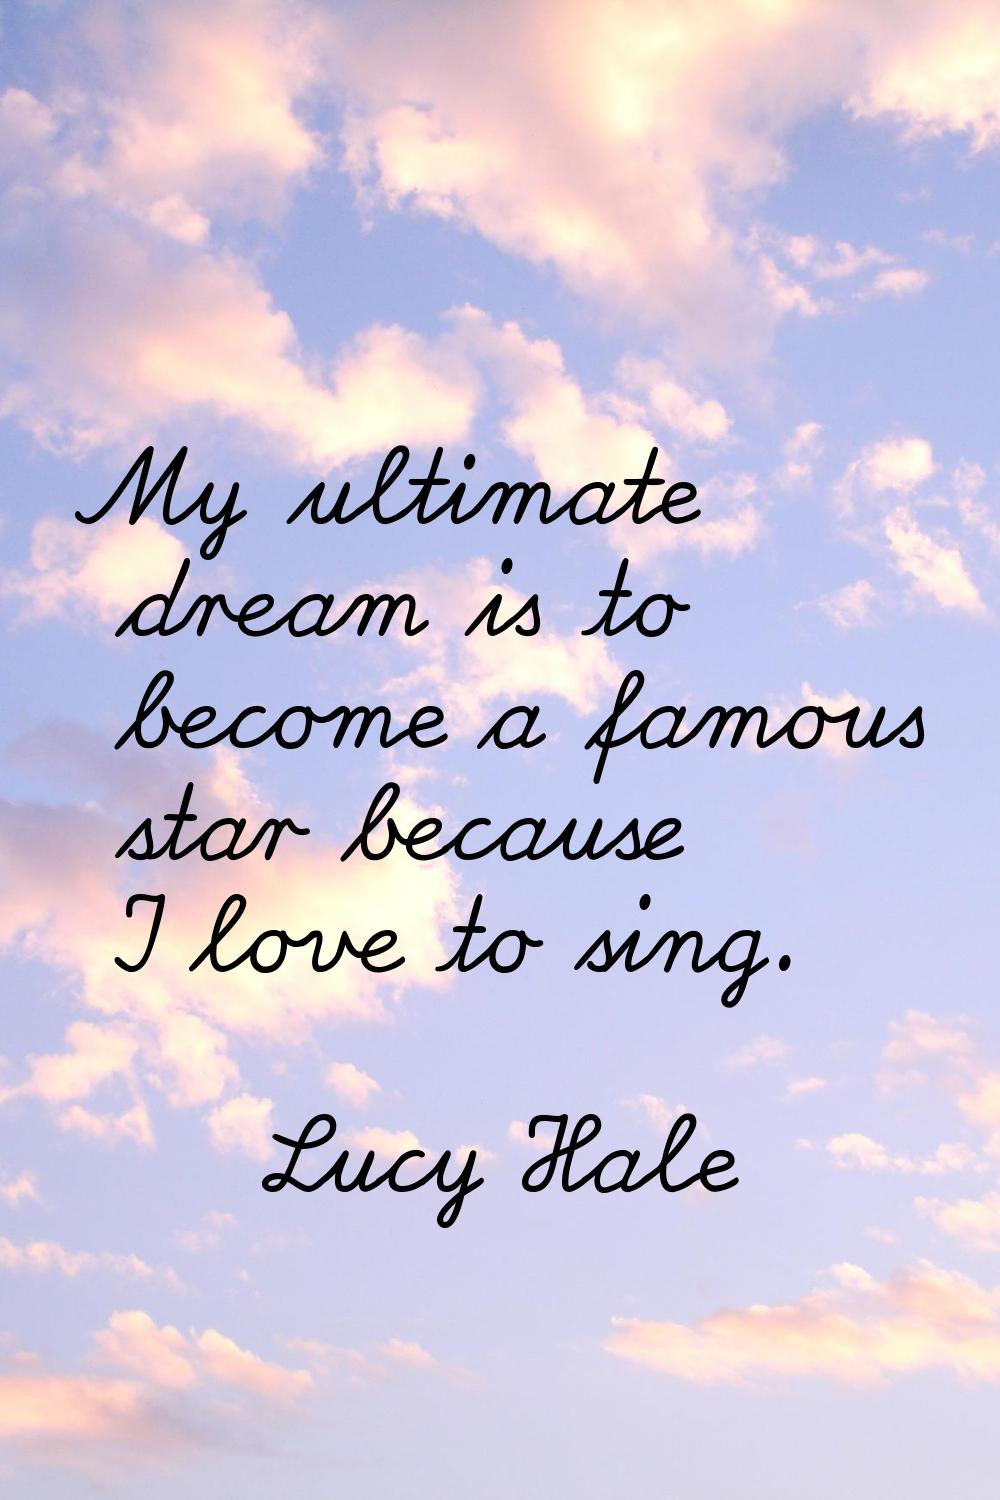 My ultimate dream is to become a famous star because I love to sing.